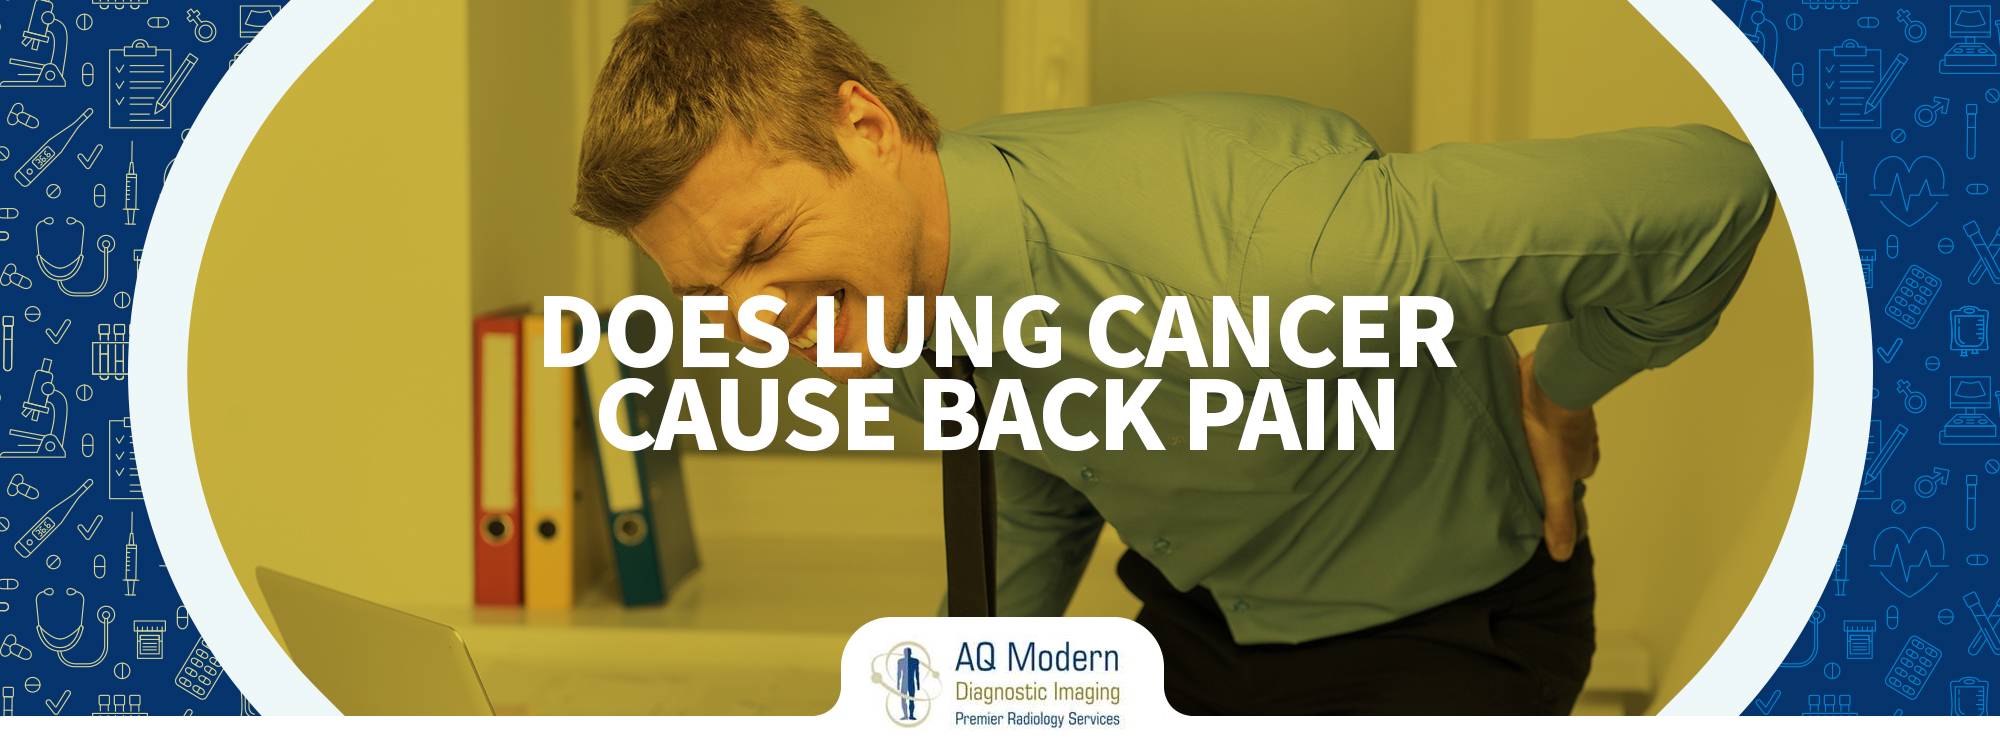 Does Lung Cancer Cause Back Pain - AQ Imaging Network